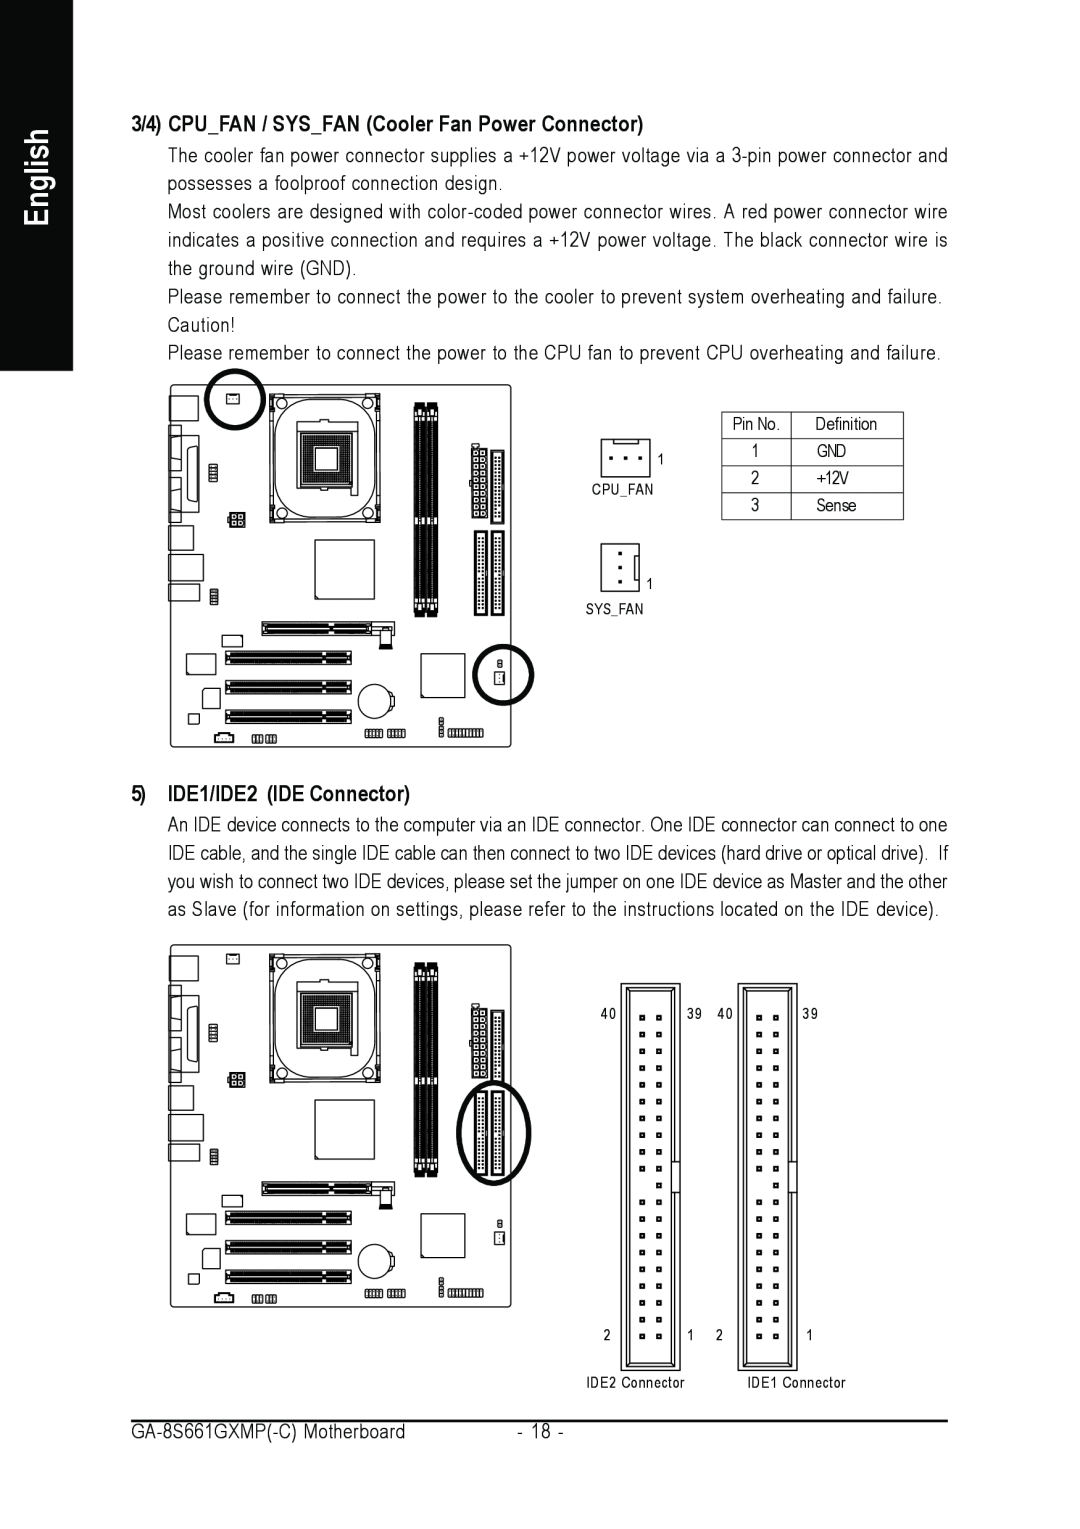 Gigabyte GA-8S661GXMP user manual 3/4 CPUFAN / SYSFAN Cooler Fan Power Connector, 5 IDE1/IDE2 IDE Connector, English 